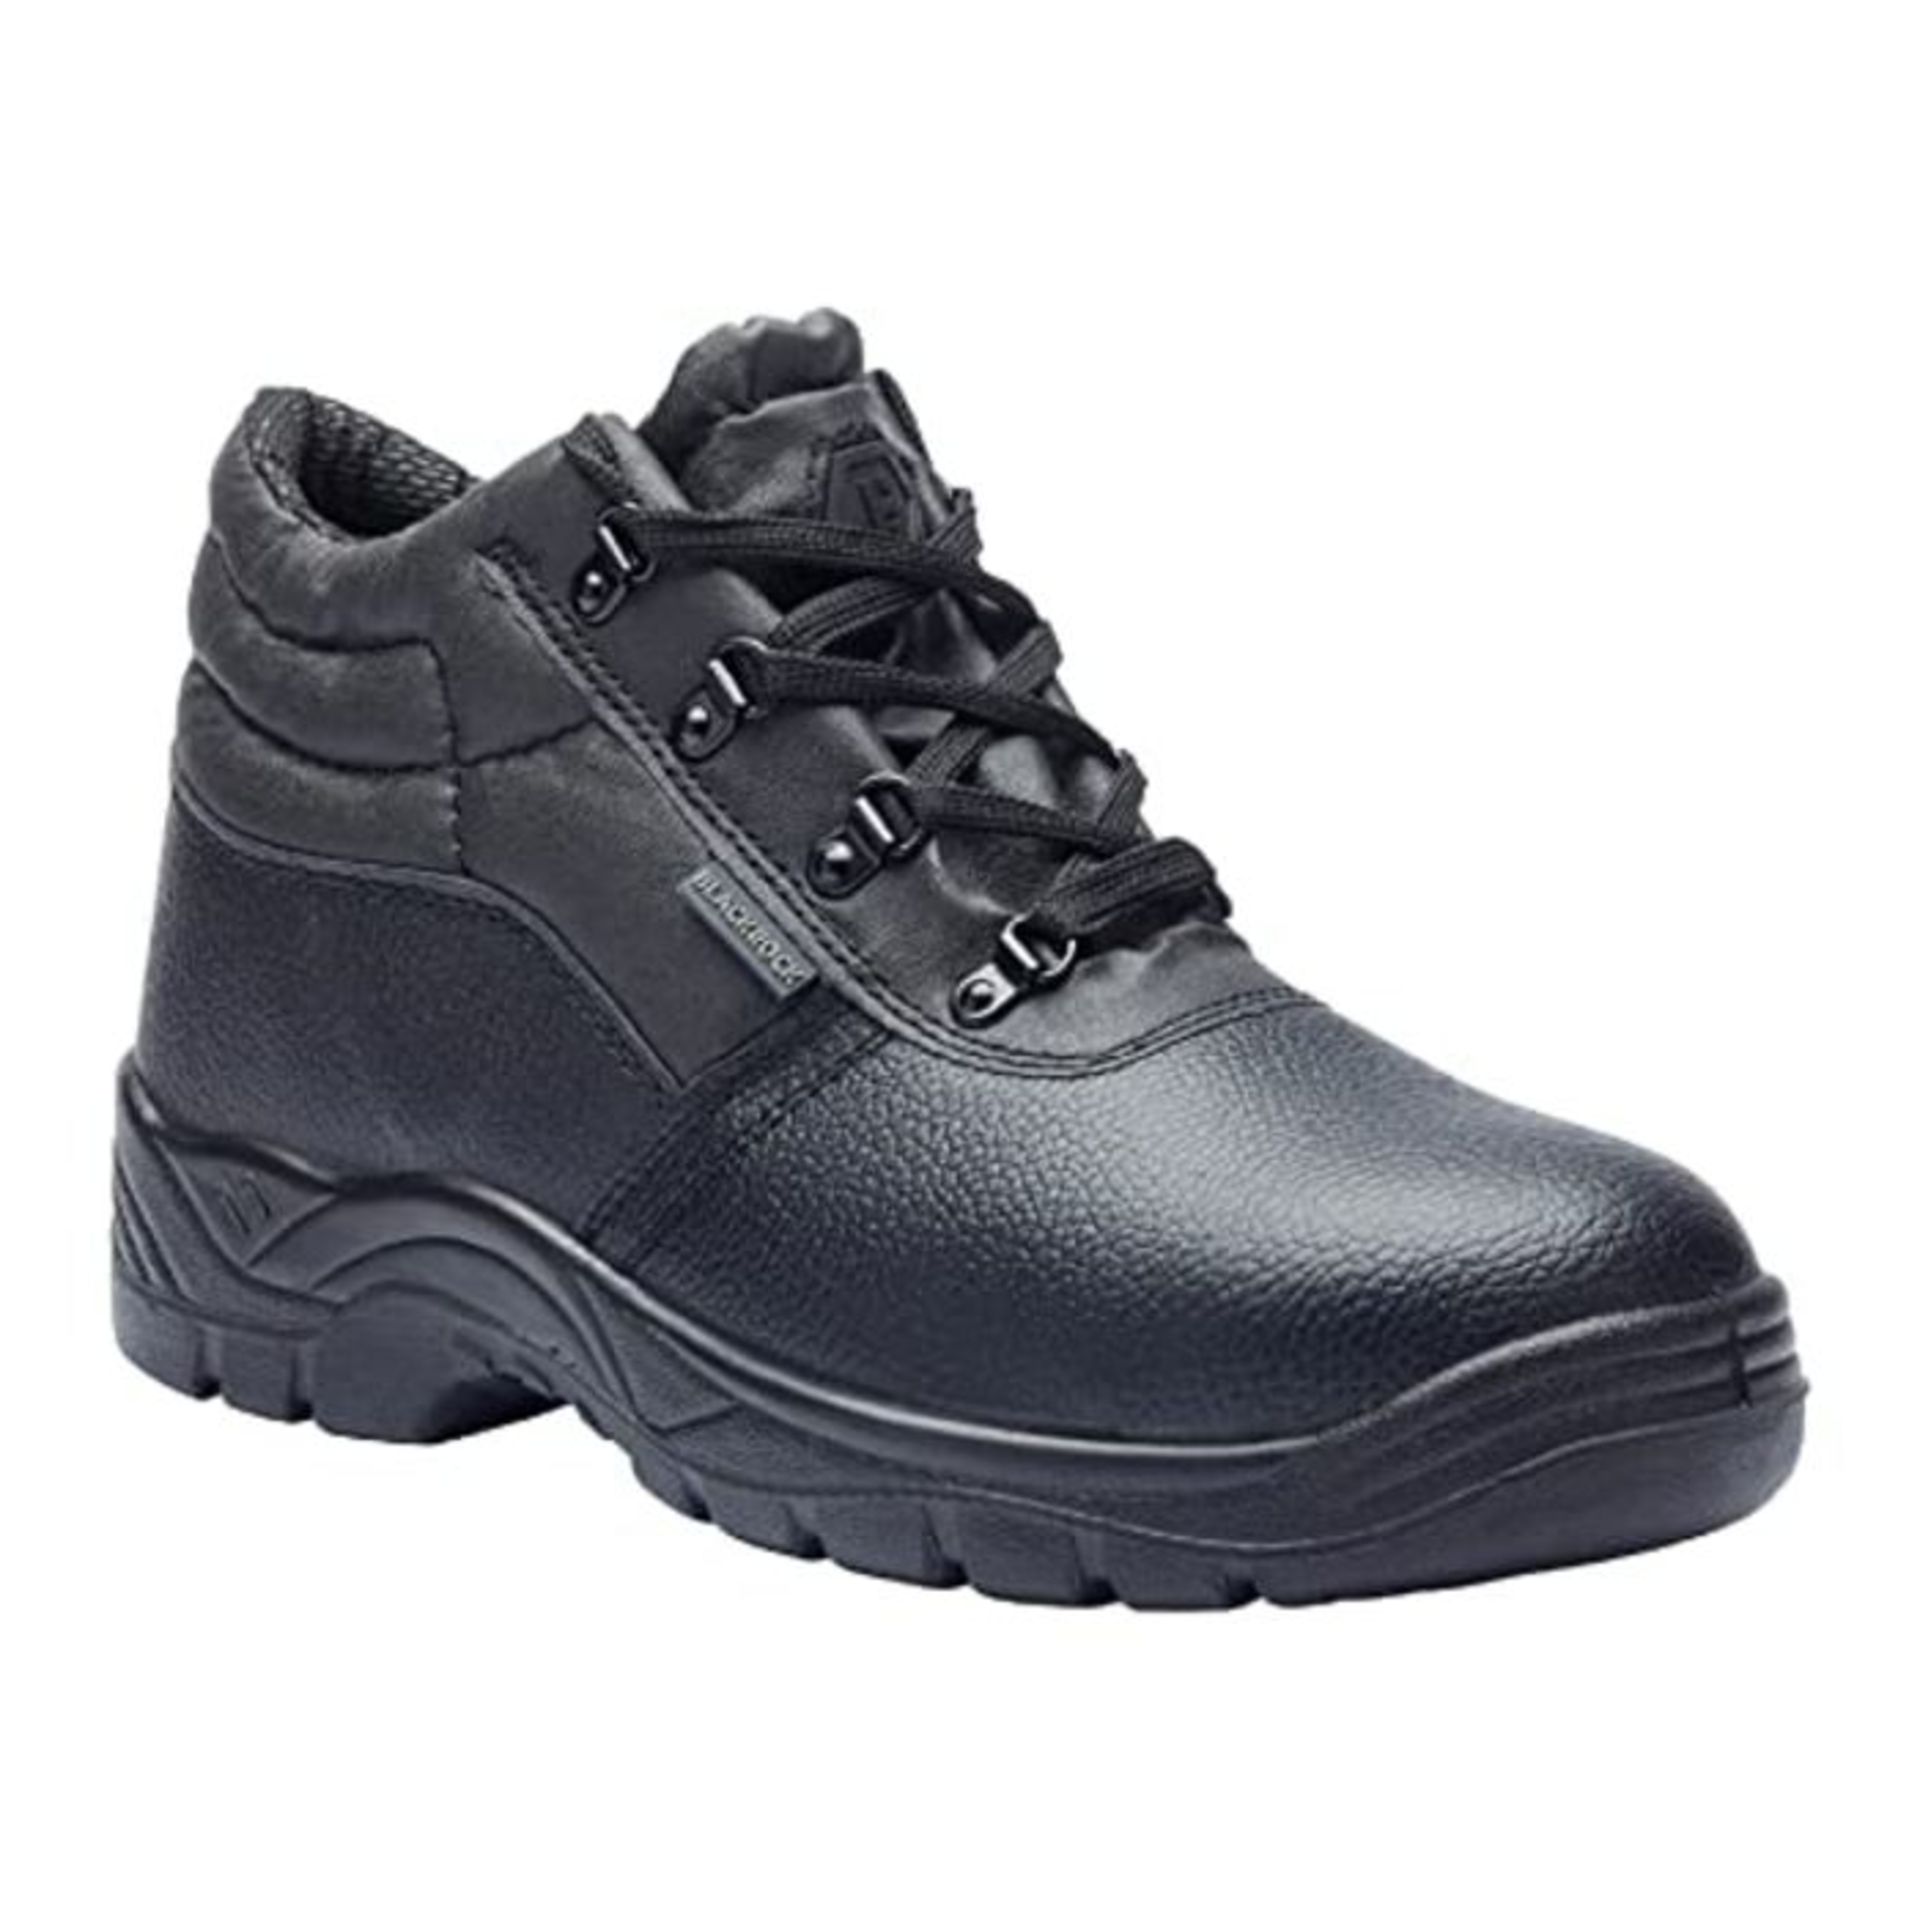 Blackrock SB-P SRC Safety Chukka Boots with Anti Static Protection, Black Leather Safe